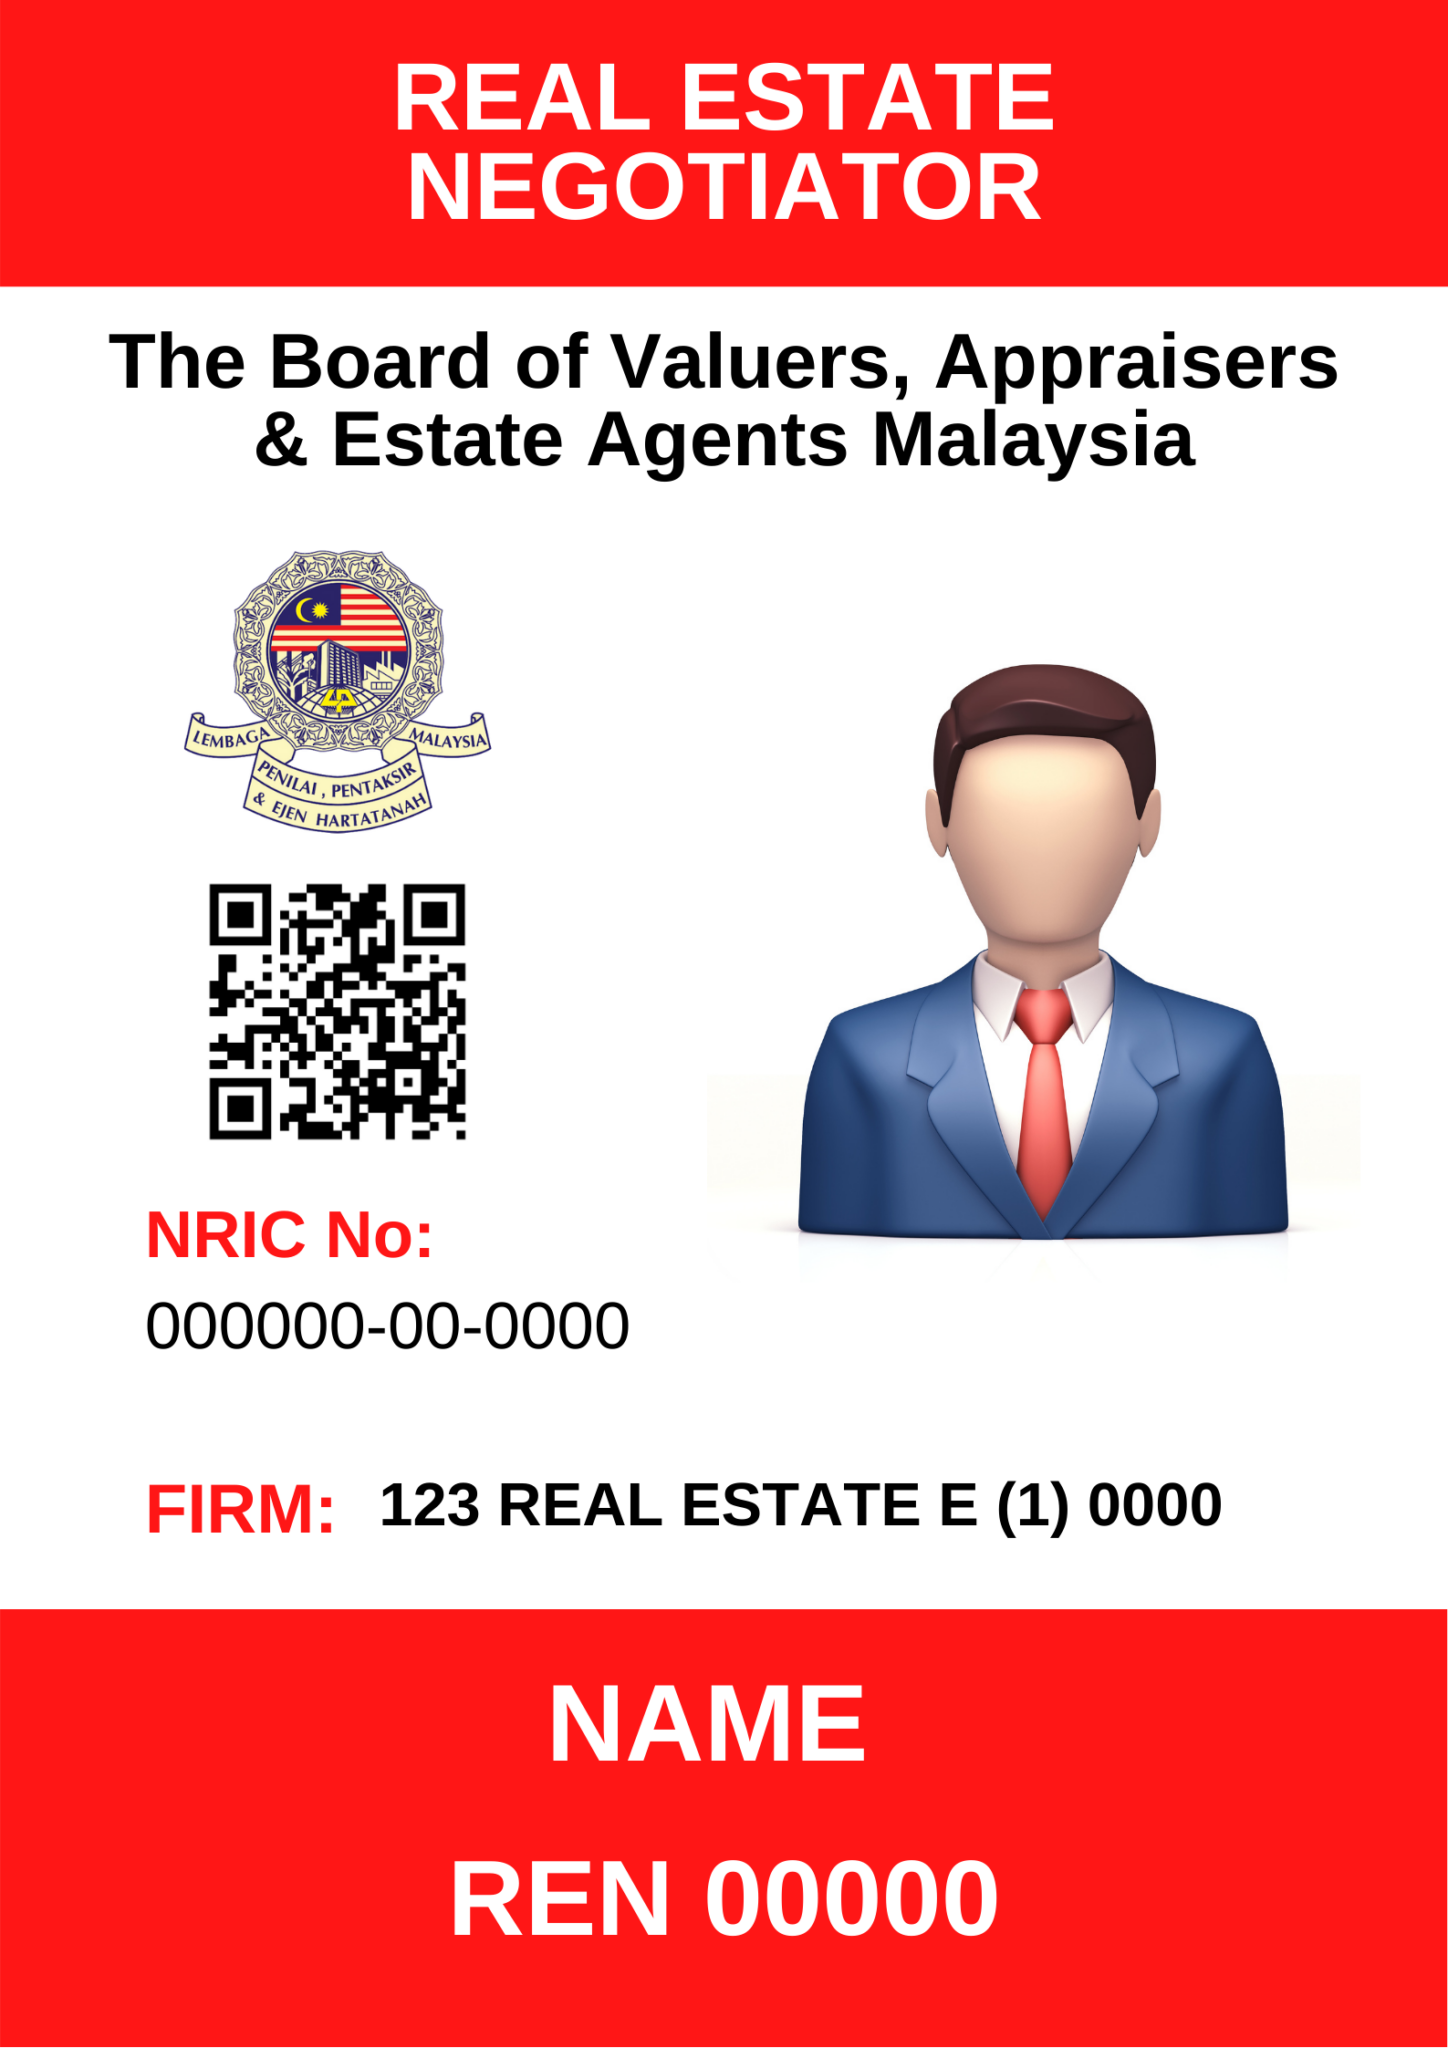 5-ways-to-check-if-a-real-estate-agent-license-is-real-in-malaysia